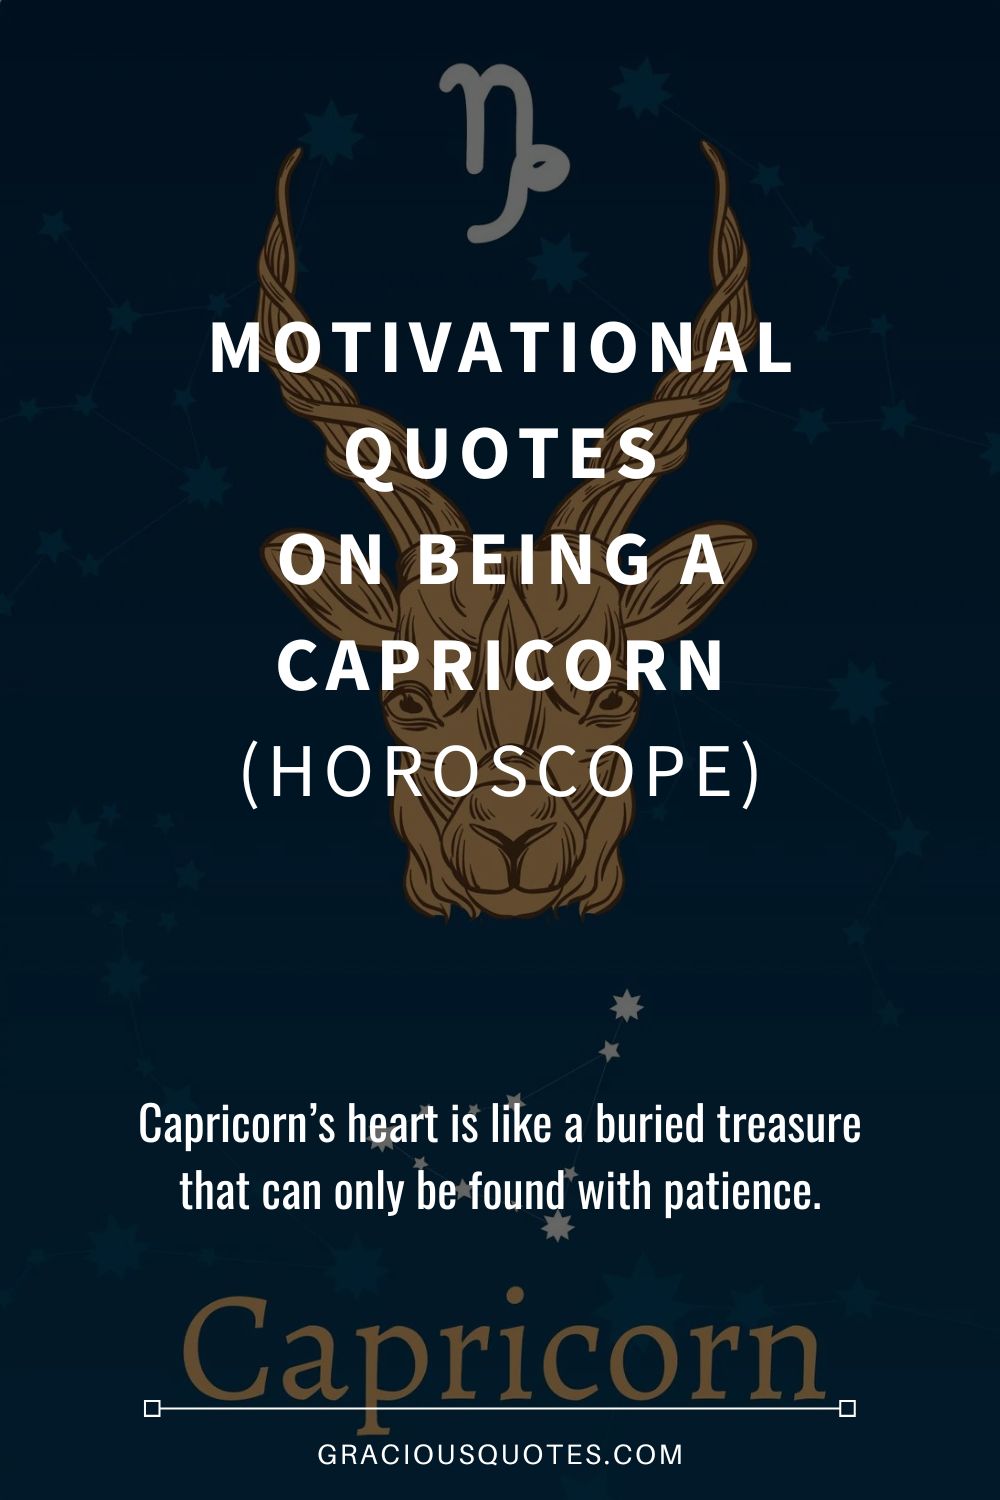  Motivational Quotes on Being a Capricorn (HOROSCOPE) - Gracious Quotes